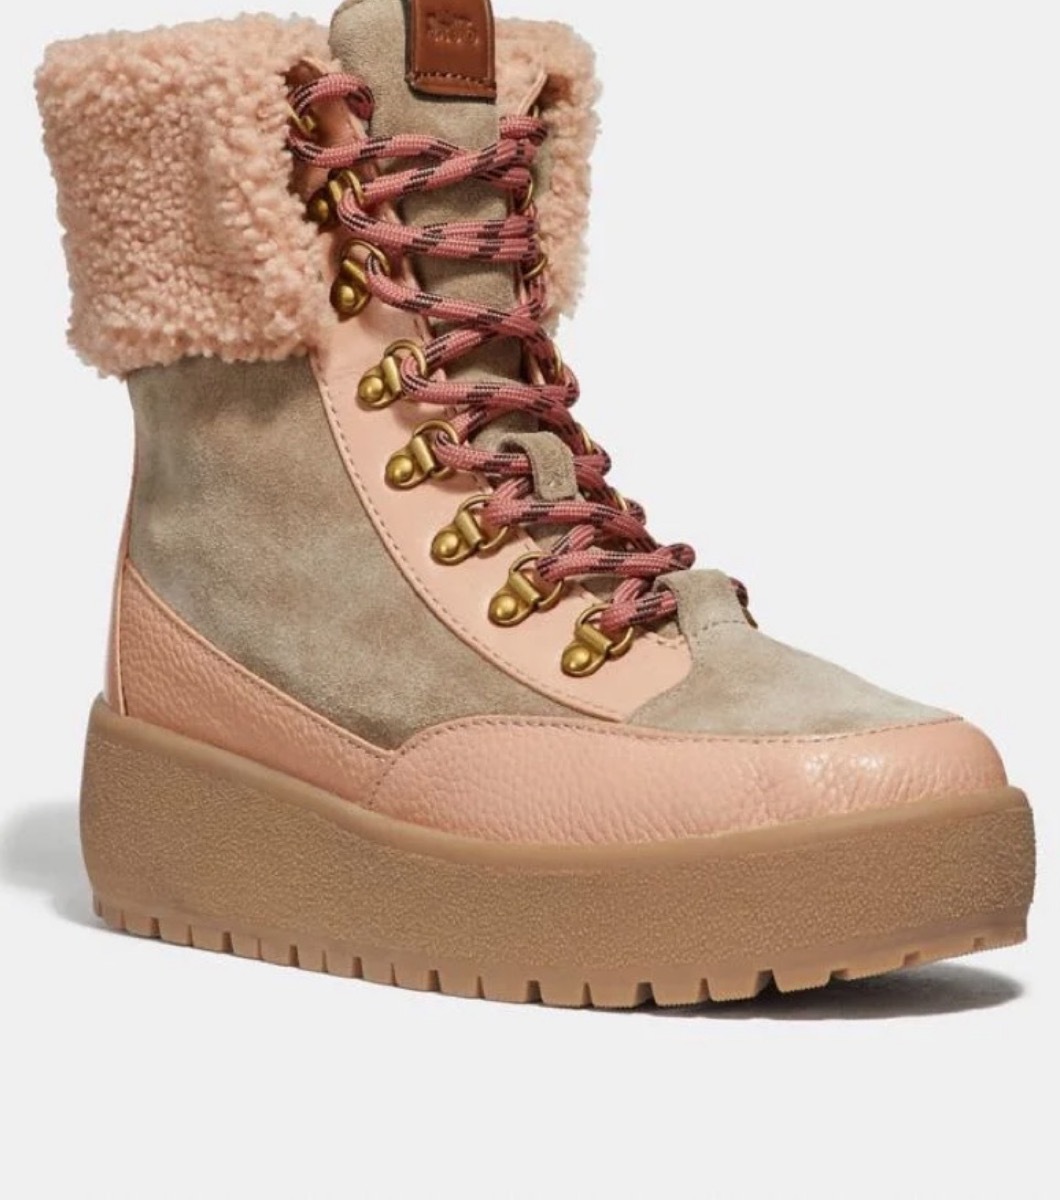 pink suede boots with shearling cuff